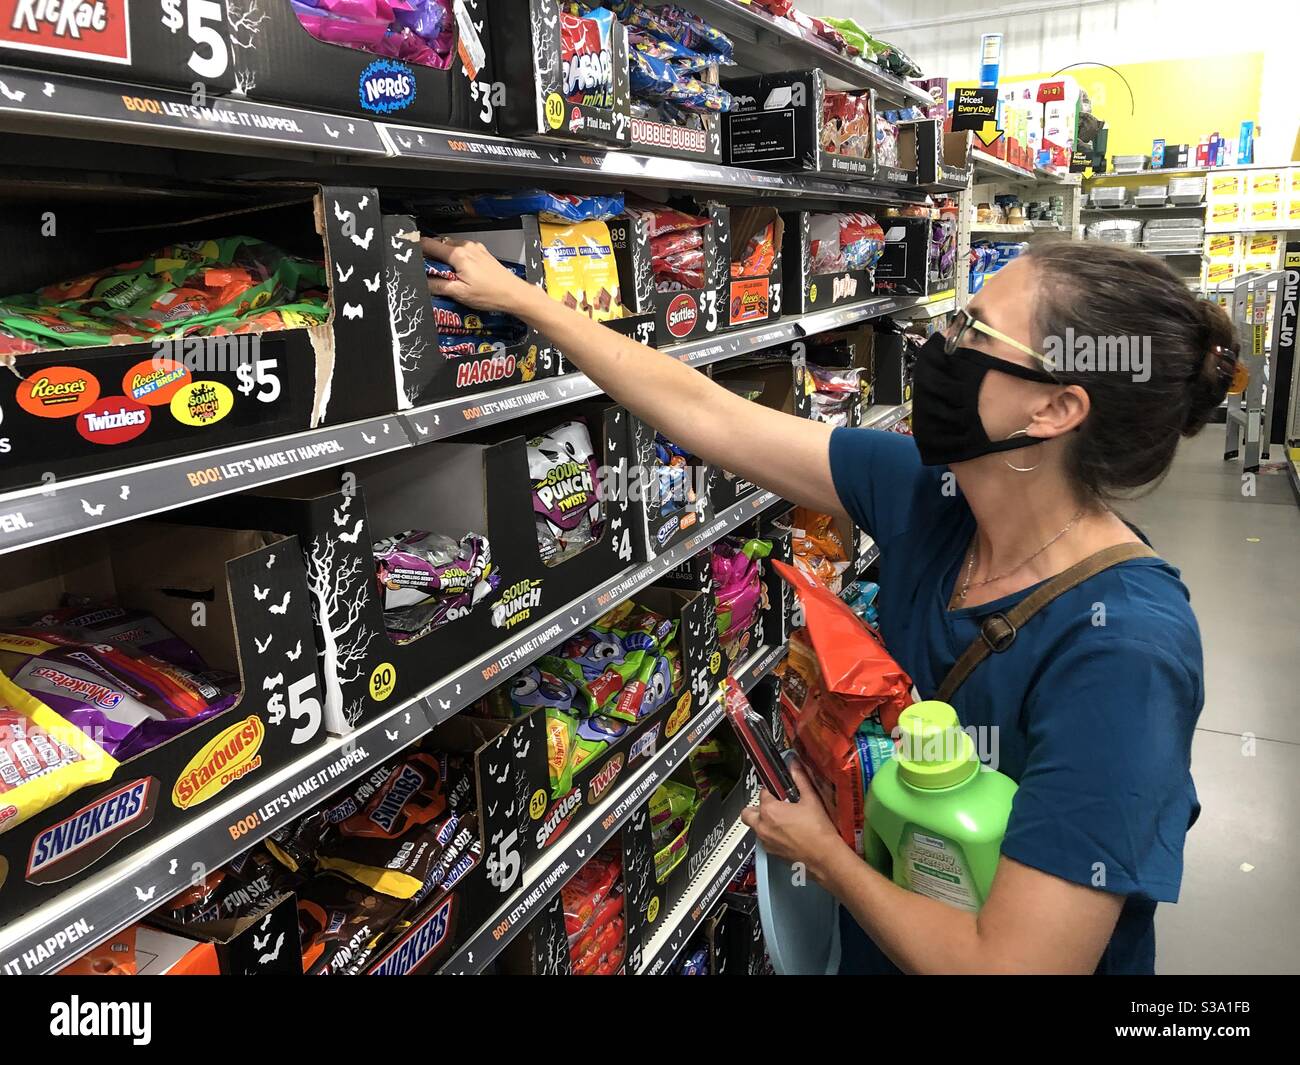 https://c8.alamy.com/comp/S3A1FB/a-shopper-holly-tippet-picks-out-halloween-candy-at-dollar-general-in-columbus-mississippi-photo-taken-august-16-2020-S3A1FB.jpg